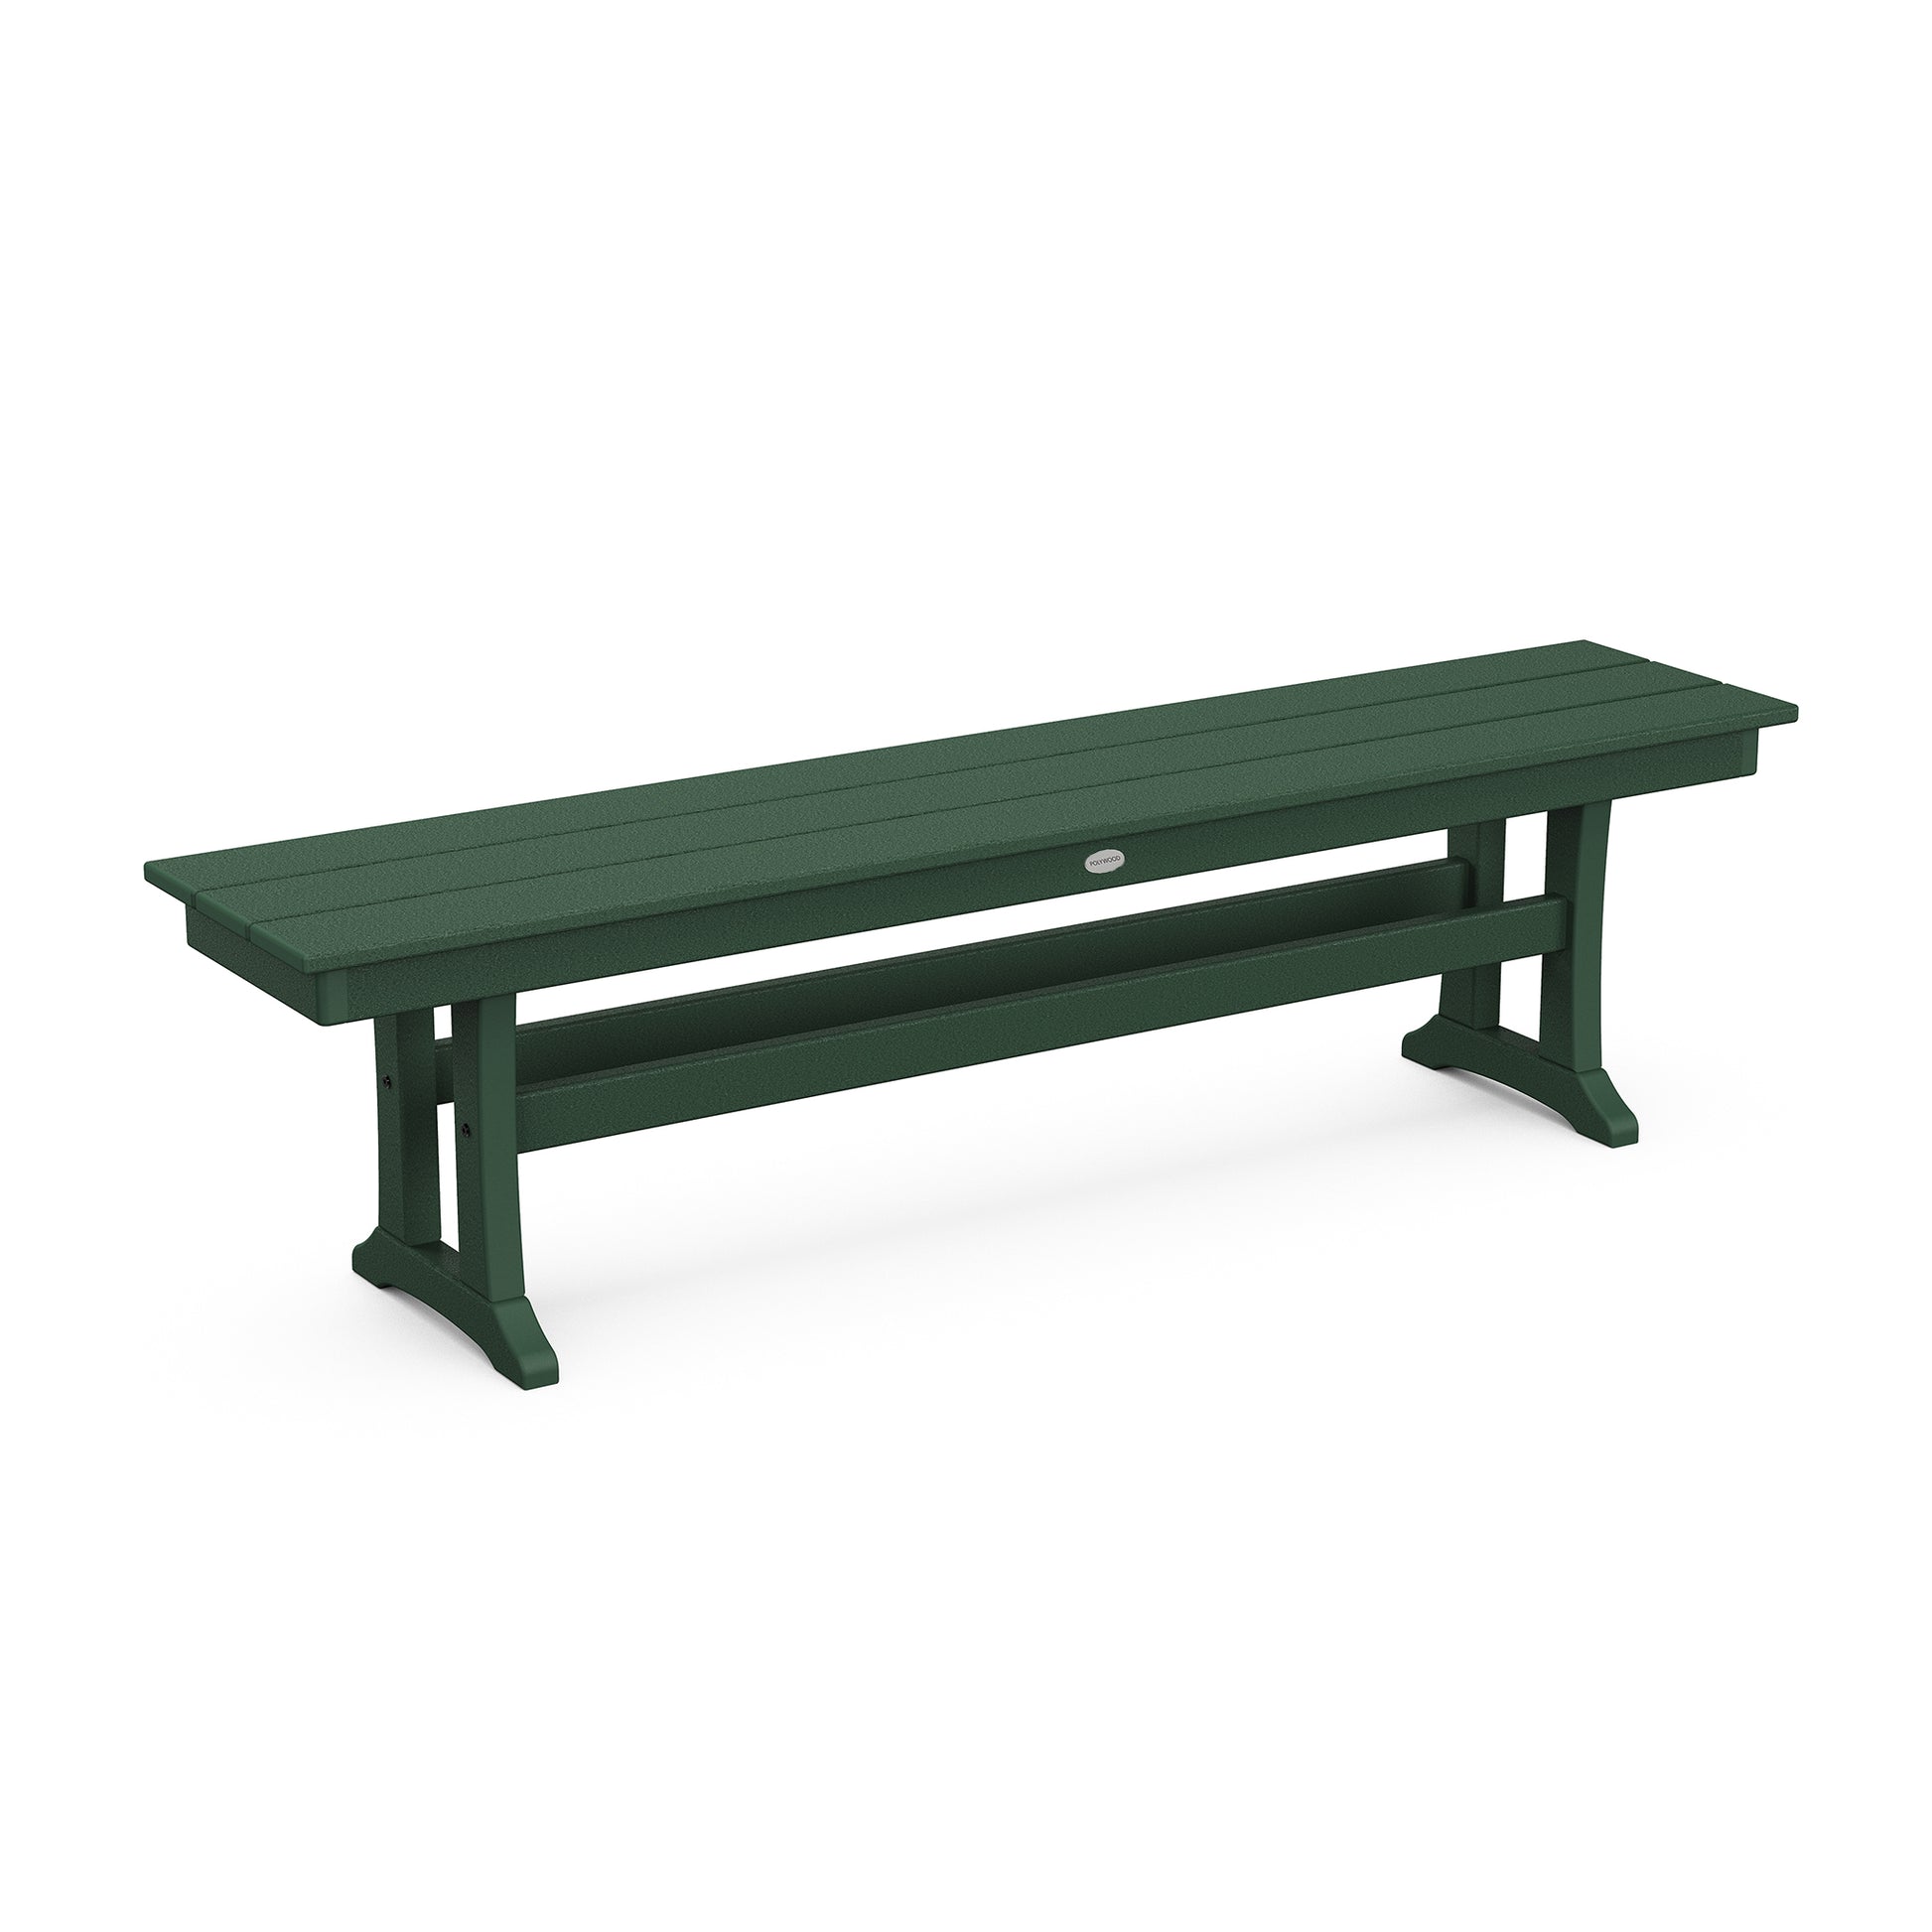 A long, green POLYWOOD Farmhouse Trestle 65" Bench crafted from weather-resistant POLYWOOD lumber with a simple, sturdy design and horizontal slats, isolated on a white background.